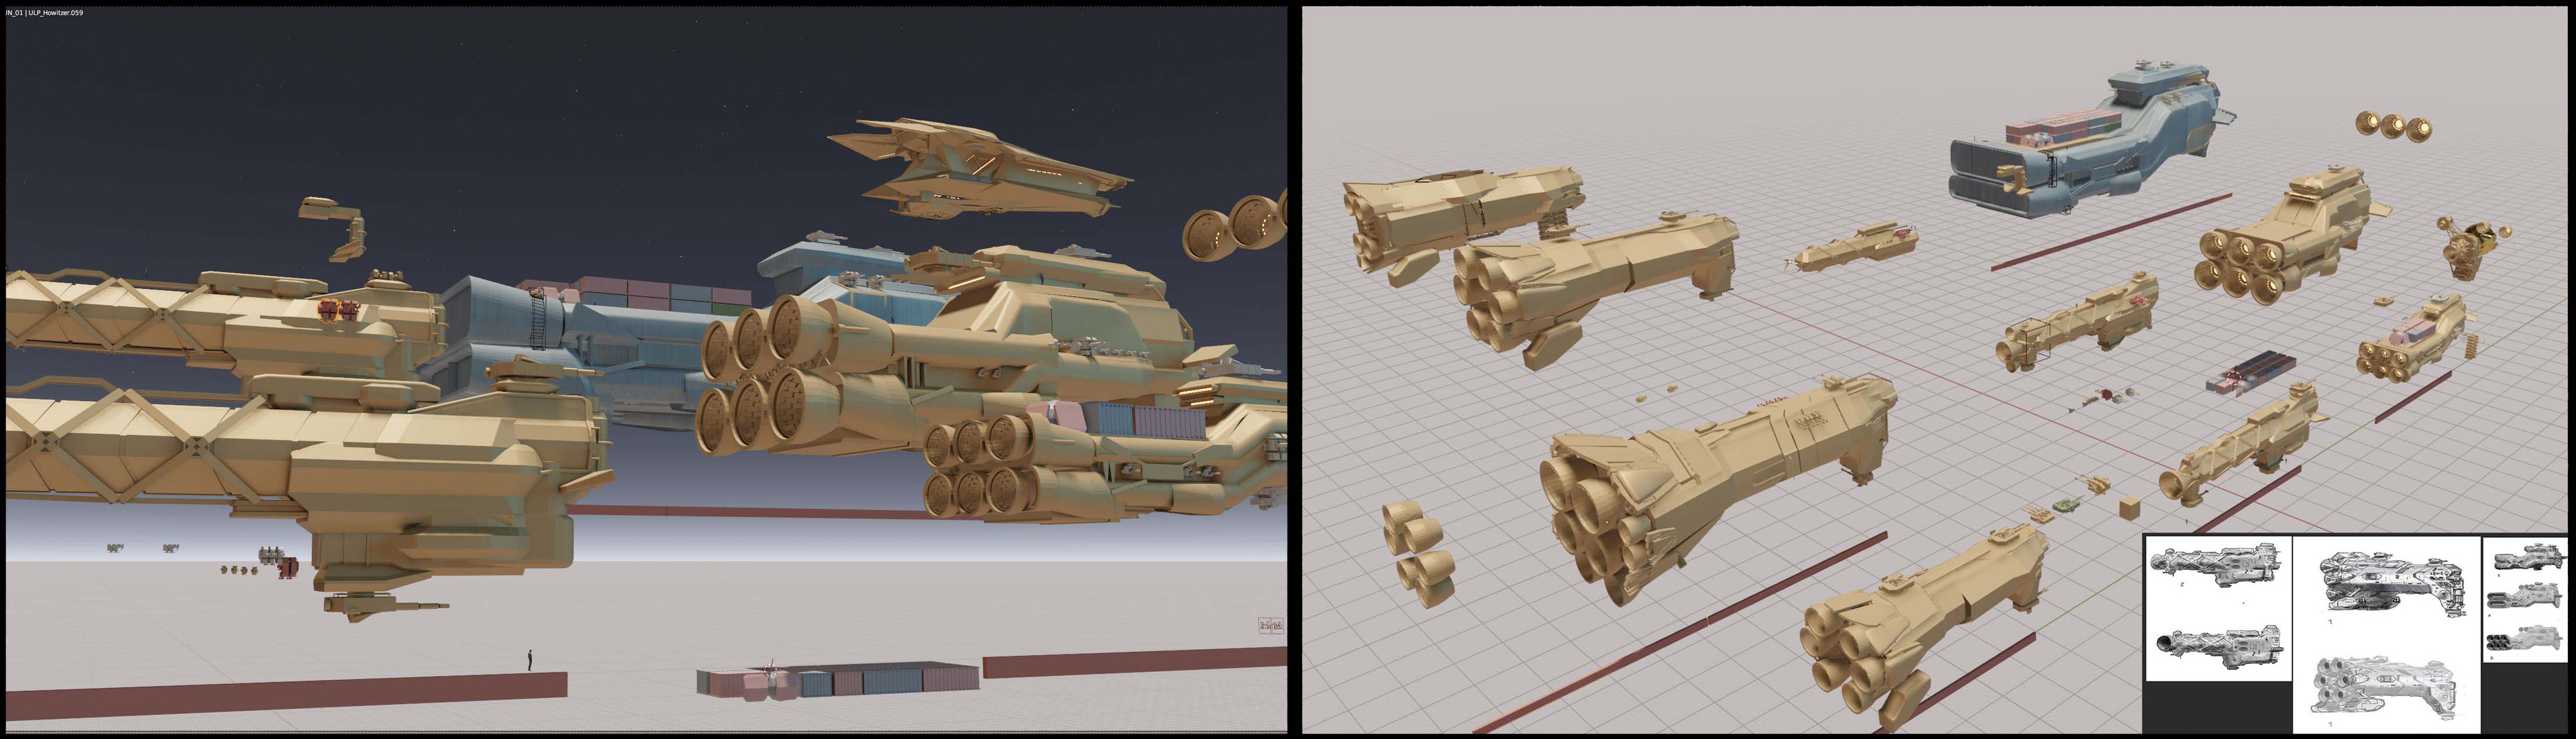 Very fast 3d blockouts of ships based on thumbnails by Alex Jay Brady, one of which became the basis for the Javelin.